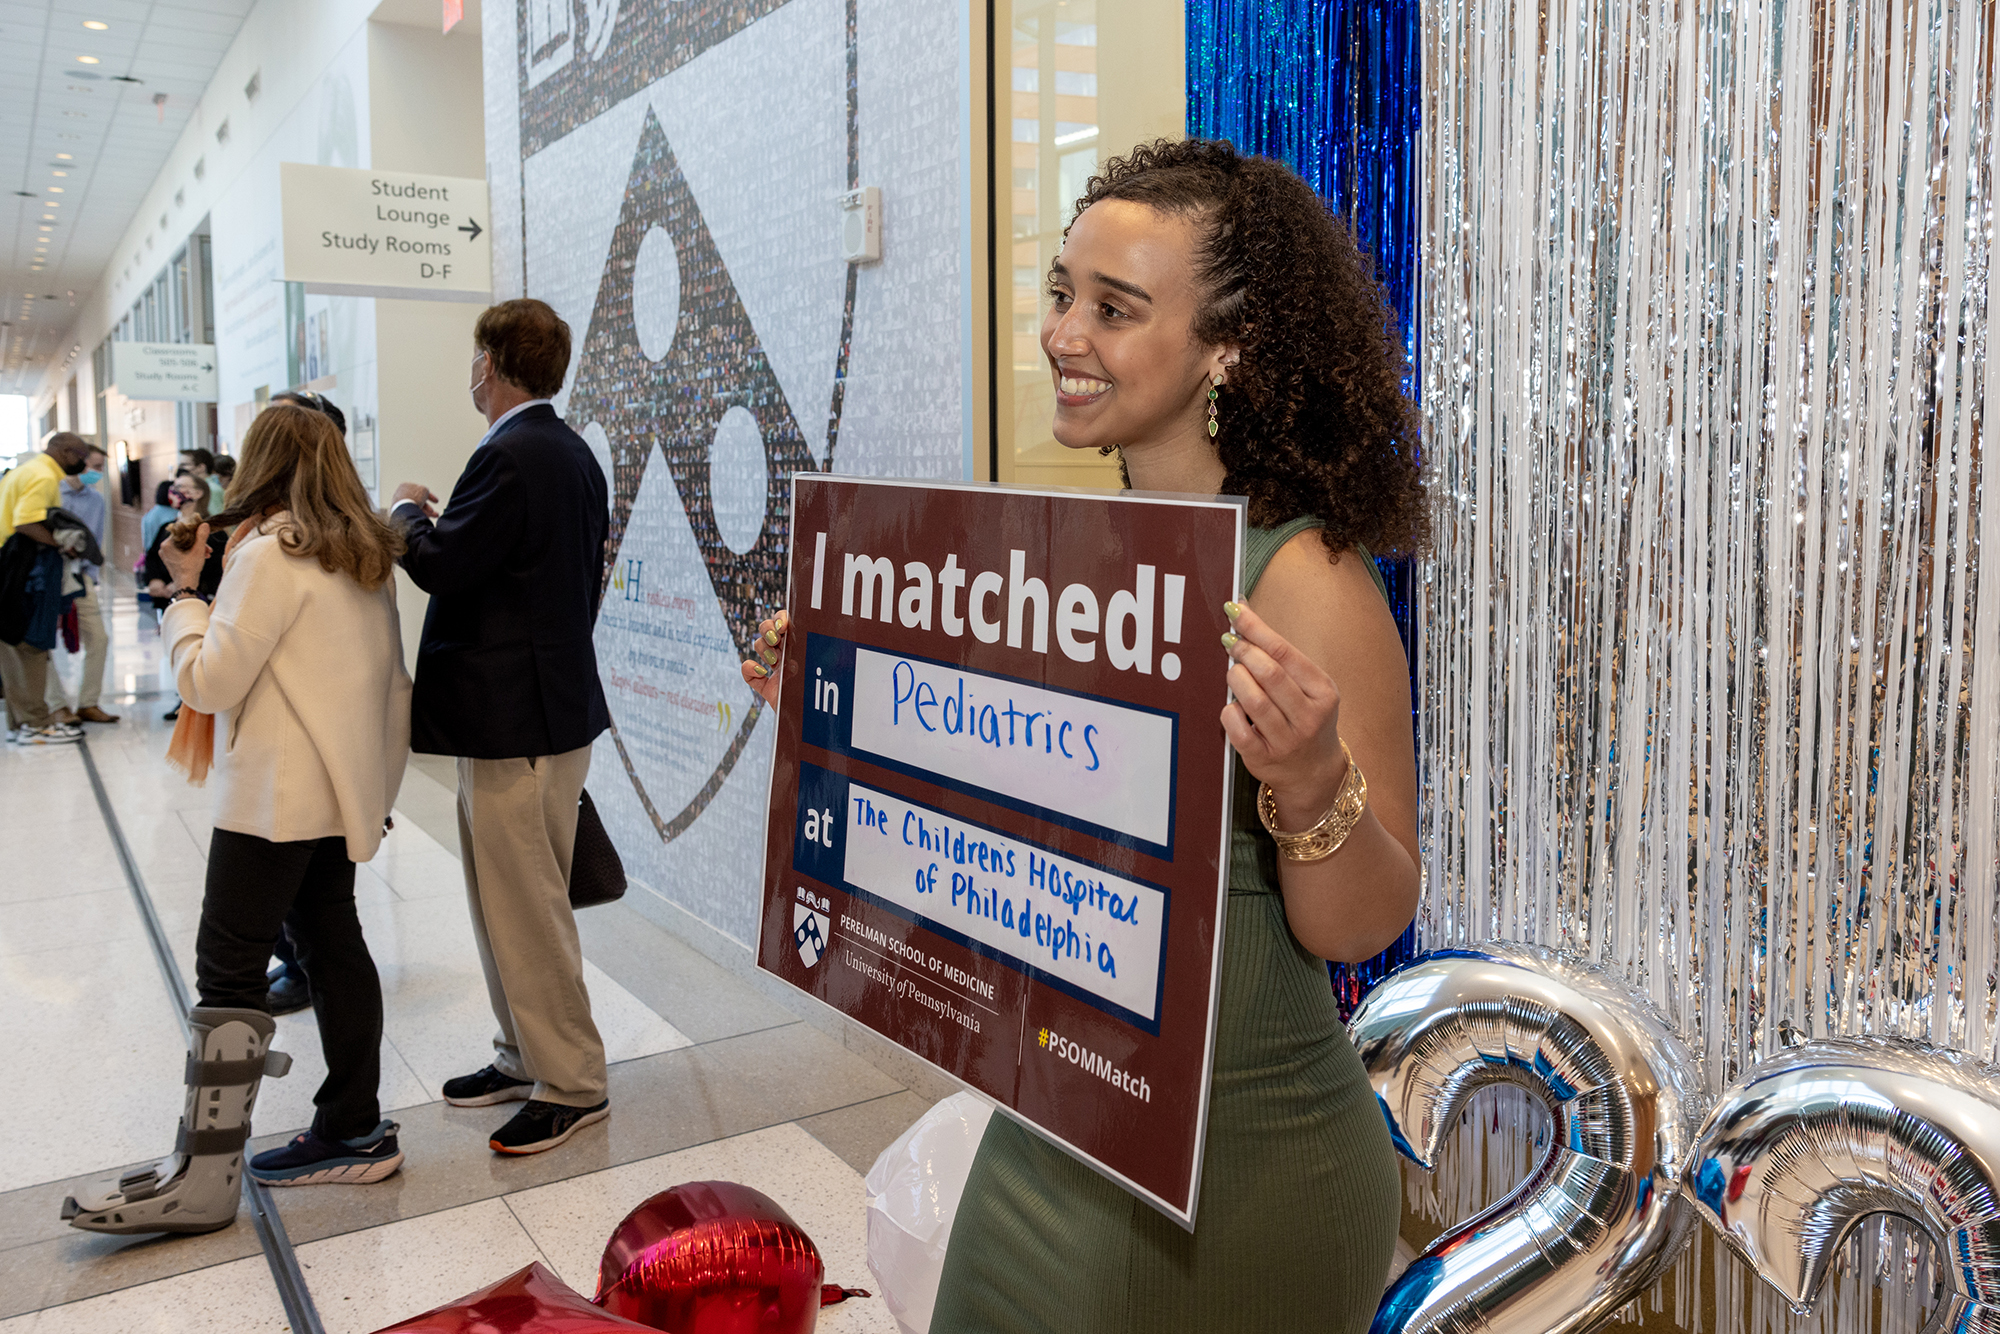 A Penn Med student holds up a large sign that reads I Matched in Pediatrics at the Children’s Hospital of Philadelphia.